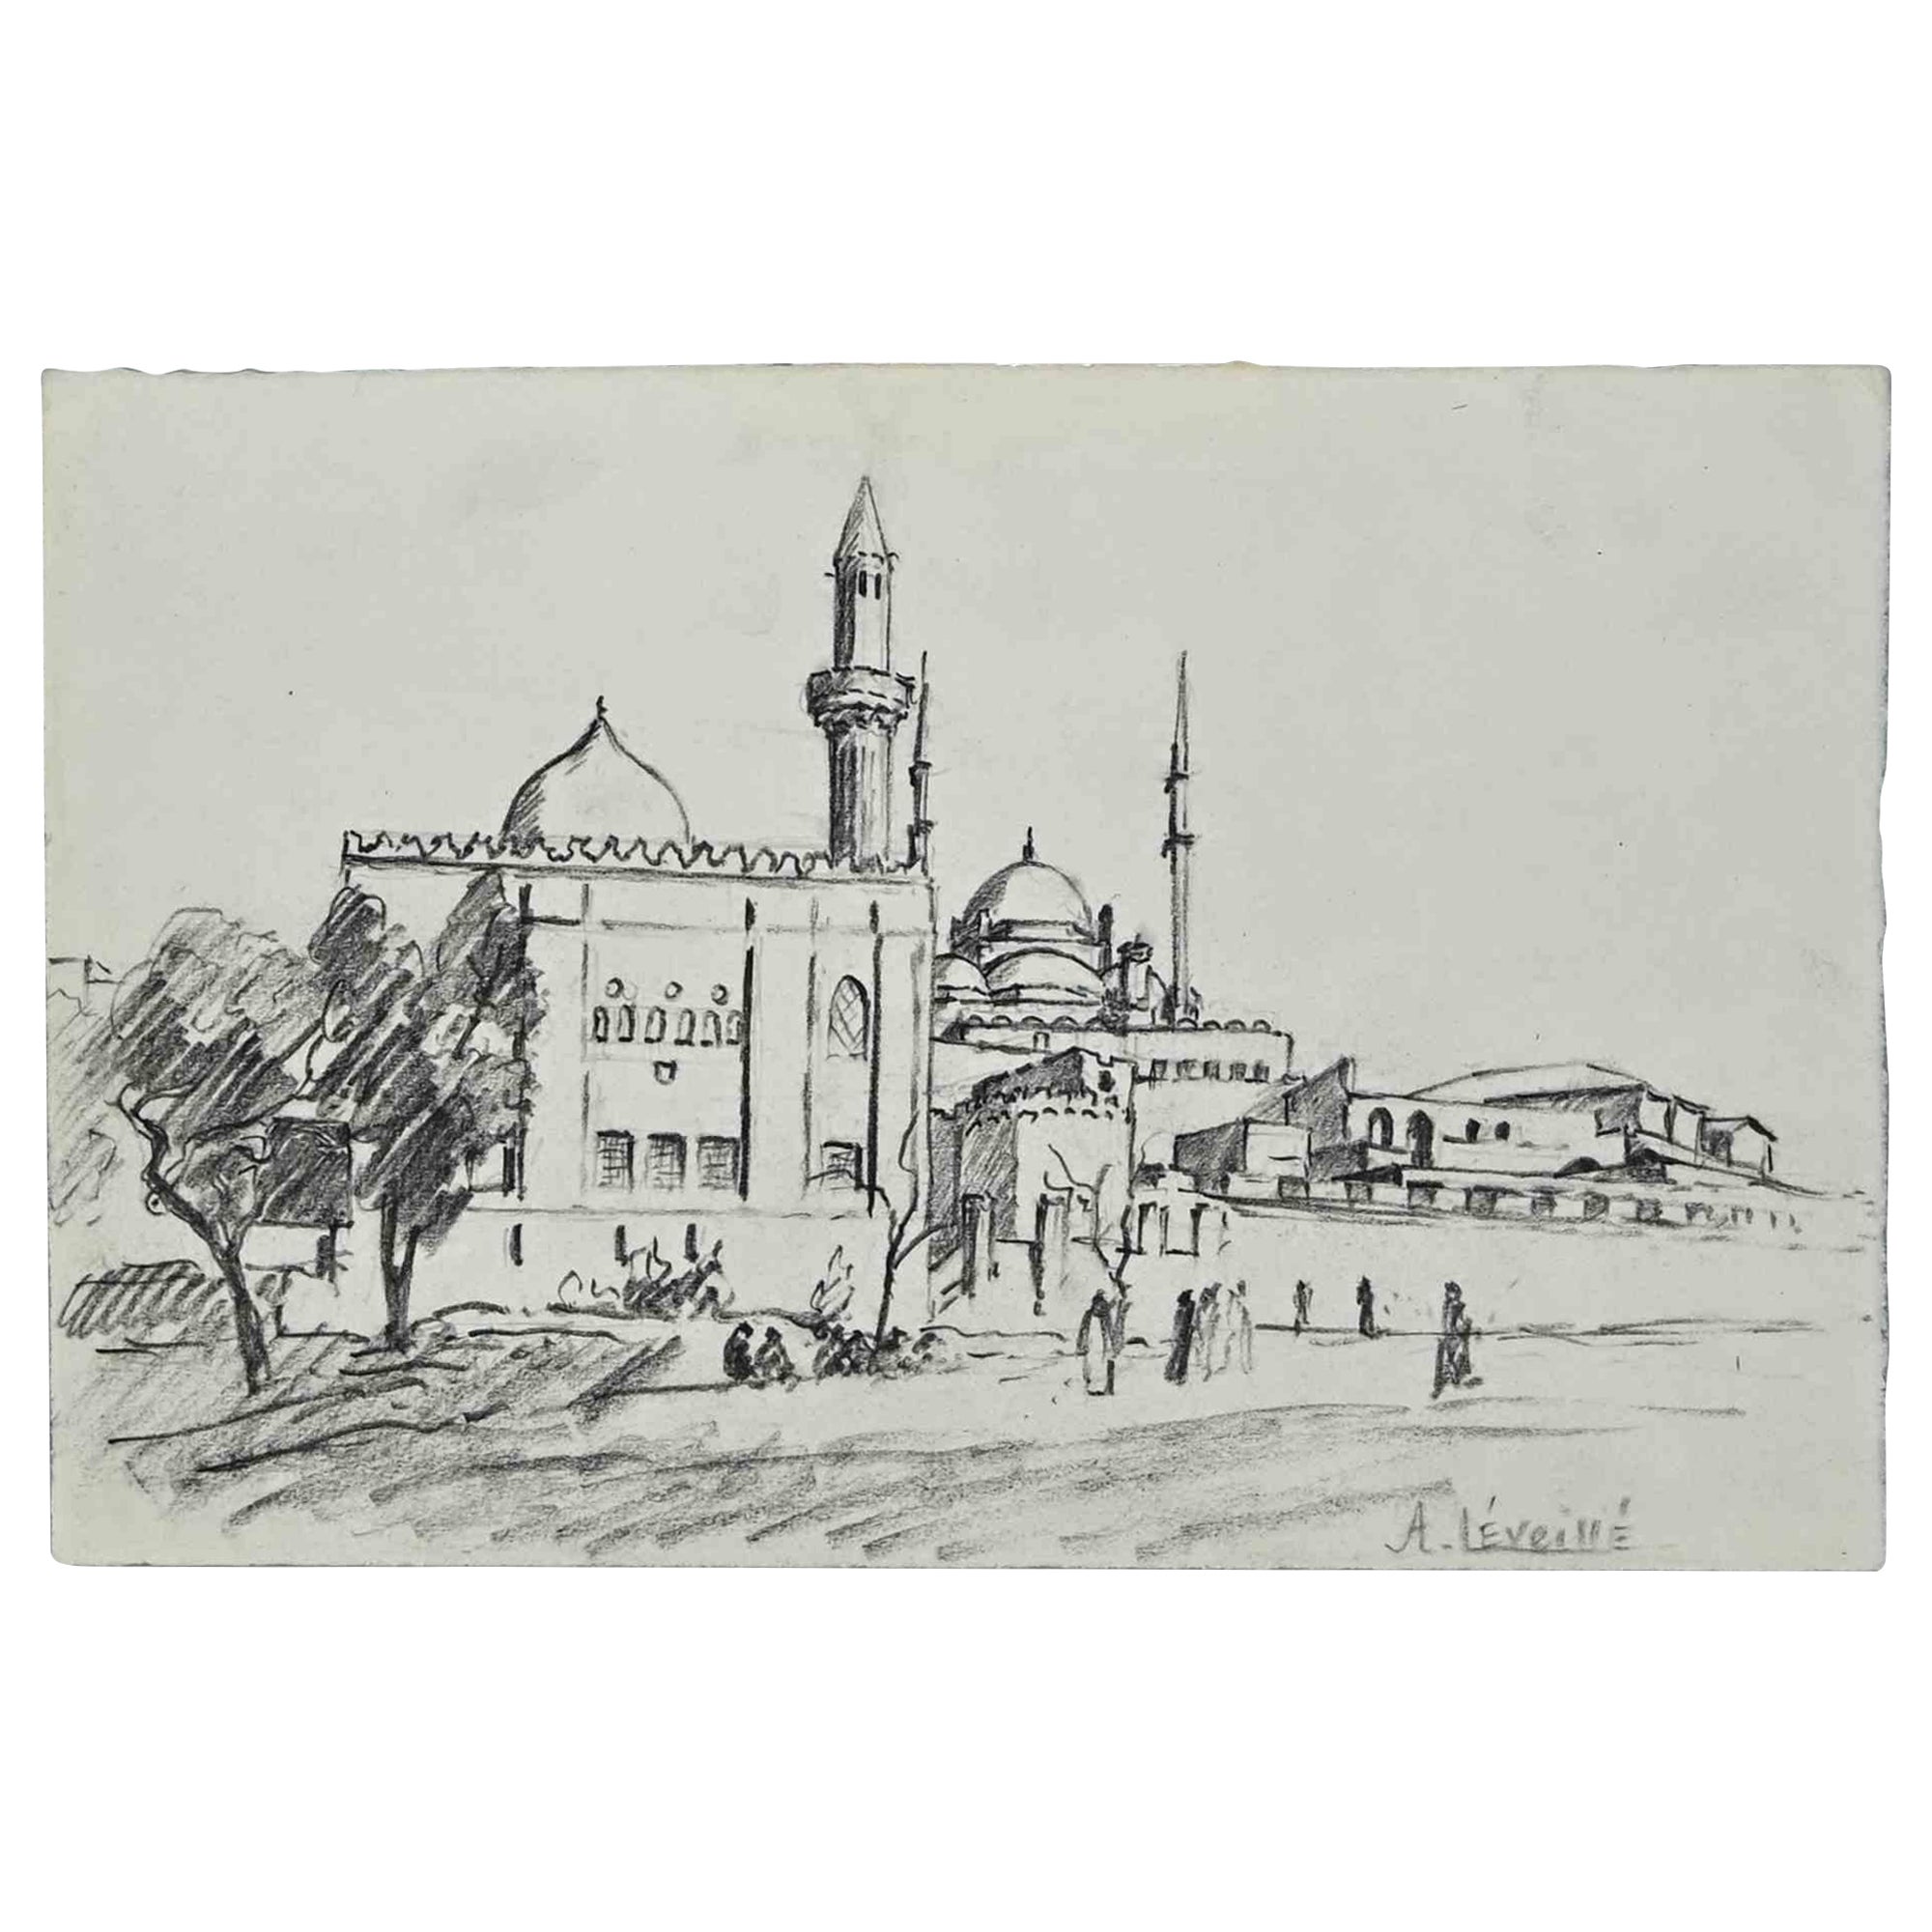 Arabic Landscape is an original pencil drawing on paper realized in the 1940s by Auguste Leiveille (1840-1900).

Hand-signed on the lower.

The artwork is in good condition on ivory-colored paper, including a white cardboard Passepartout.